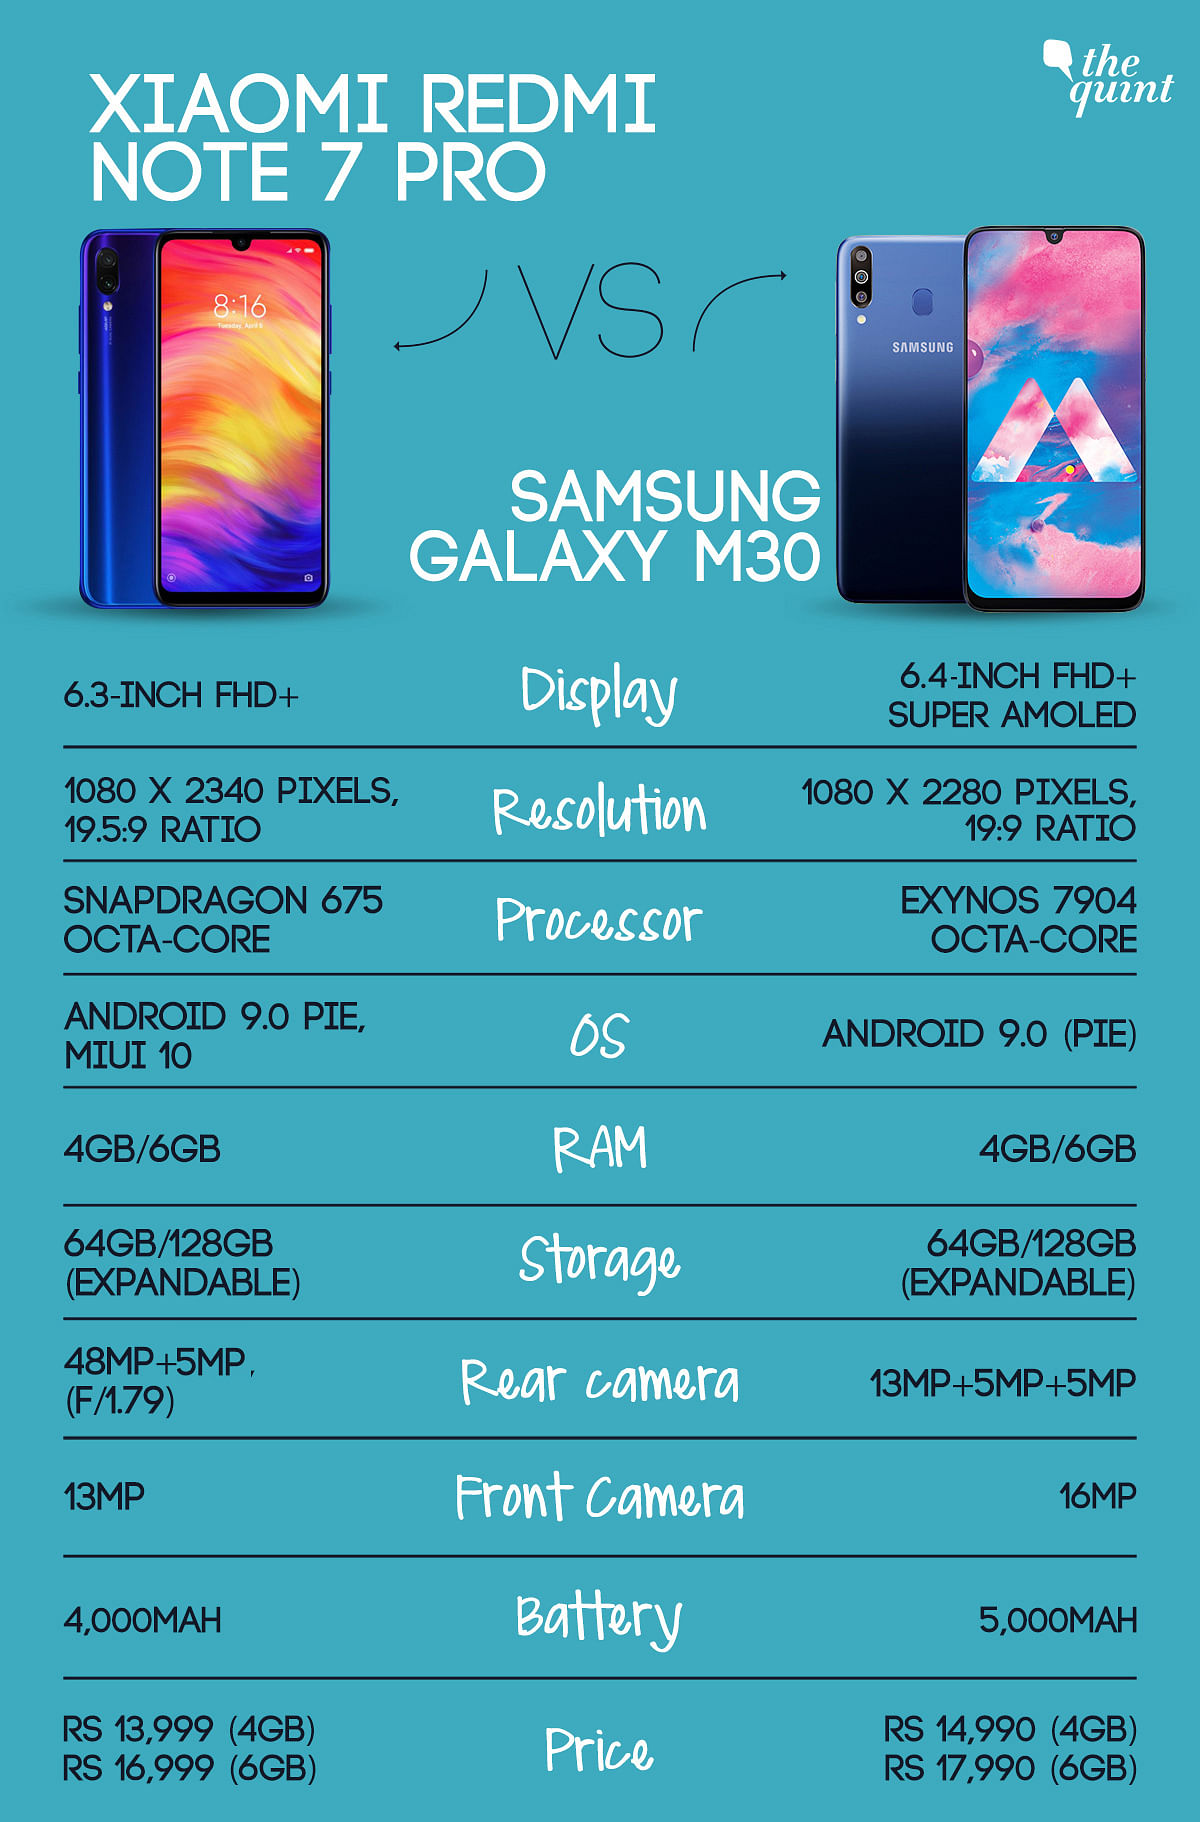 We pit the Xiaomi Redmi Note 7 Pro up against the Samsung Galaxy M30 to see which is a better bet under Rs 15,000.